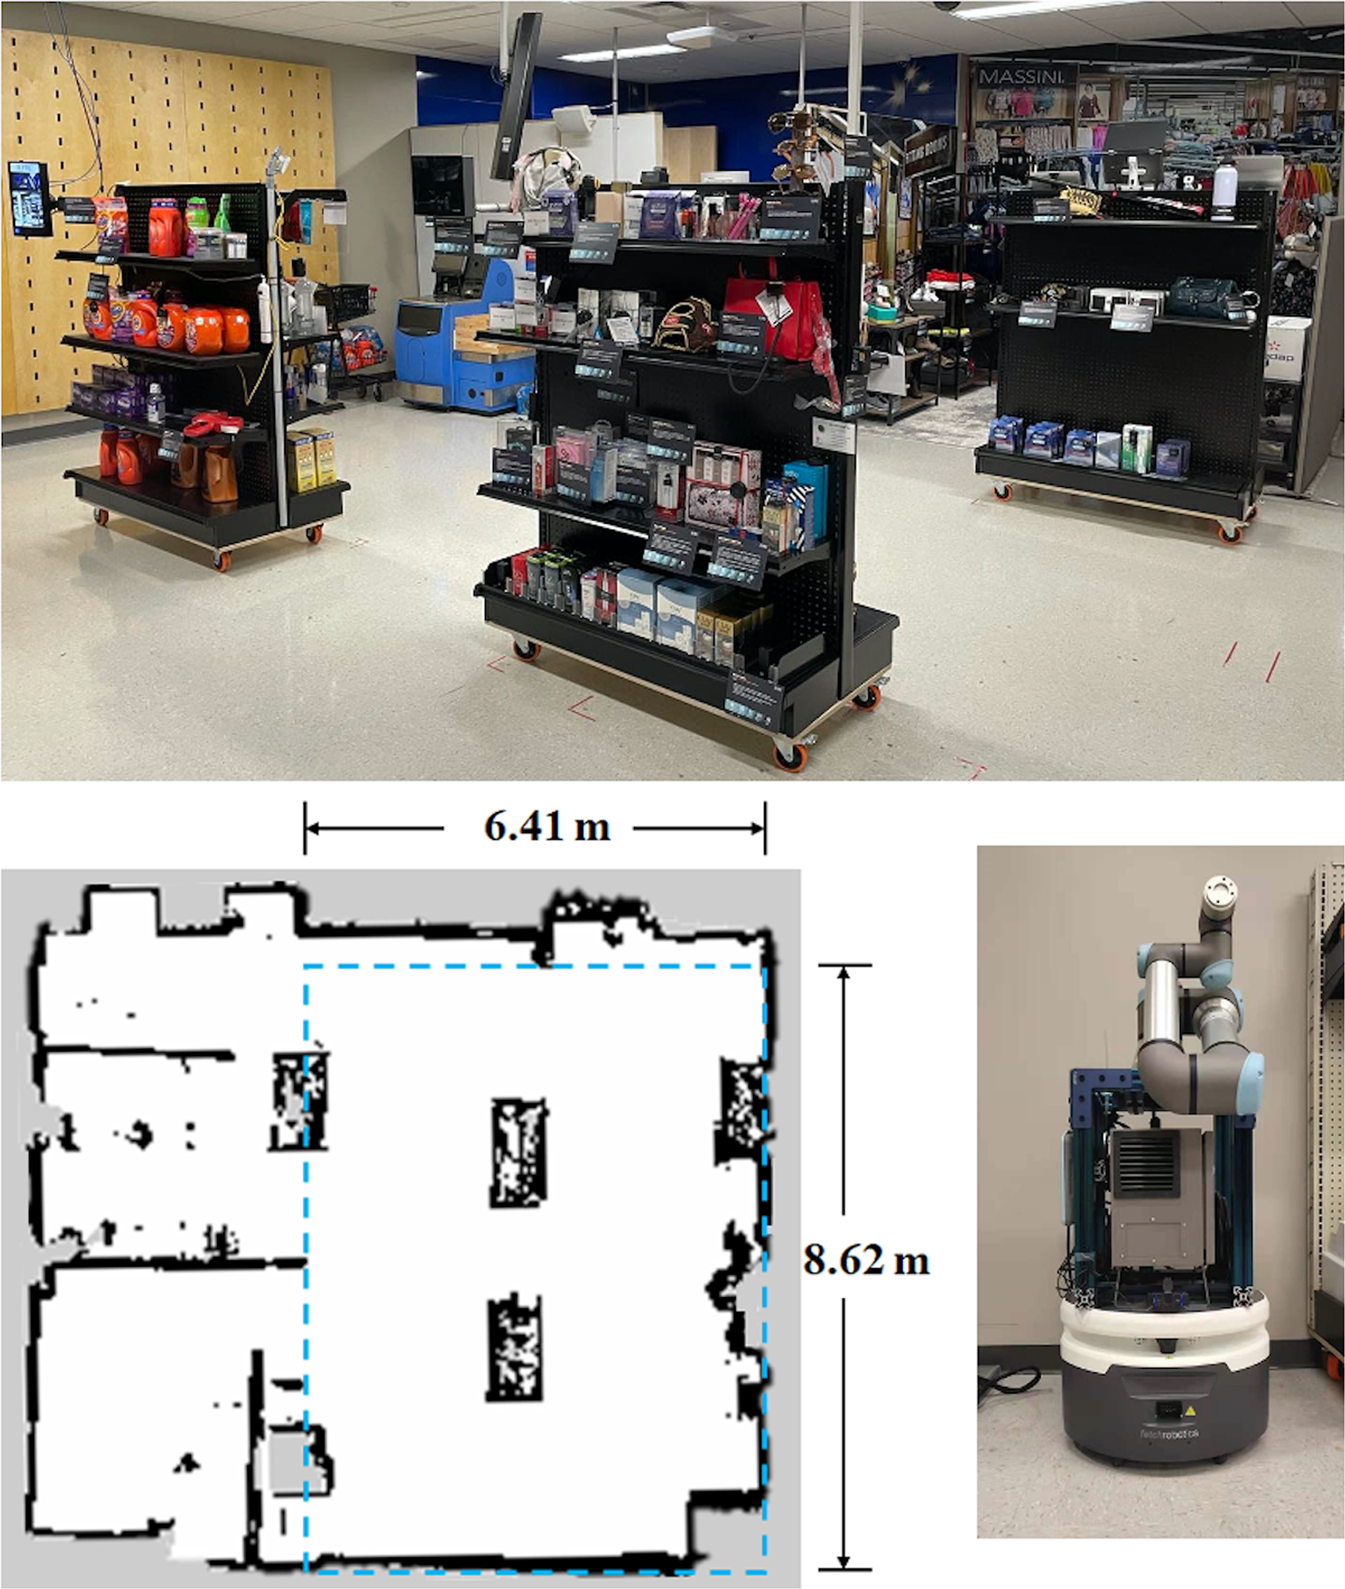 Human mobile robot interaction in the retail environment | Scientific Data